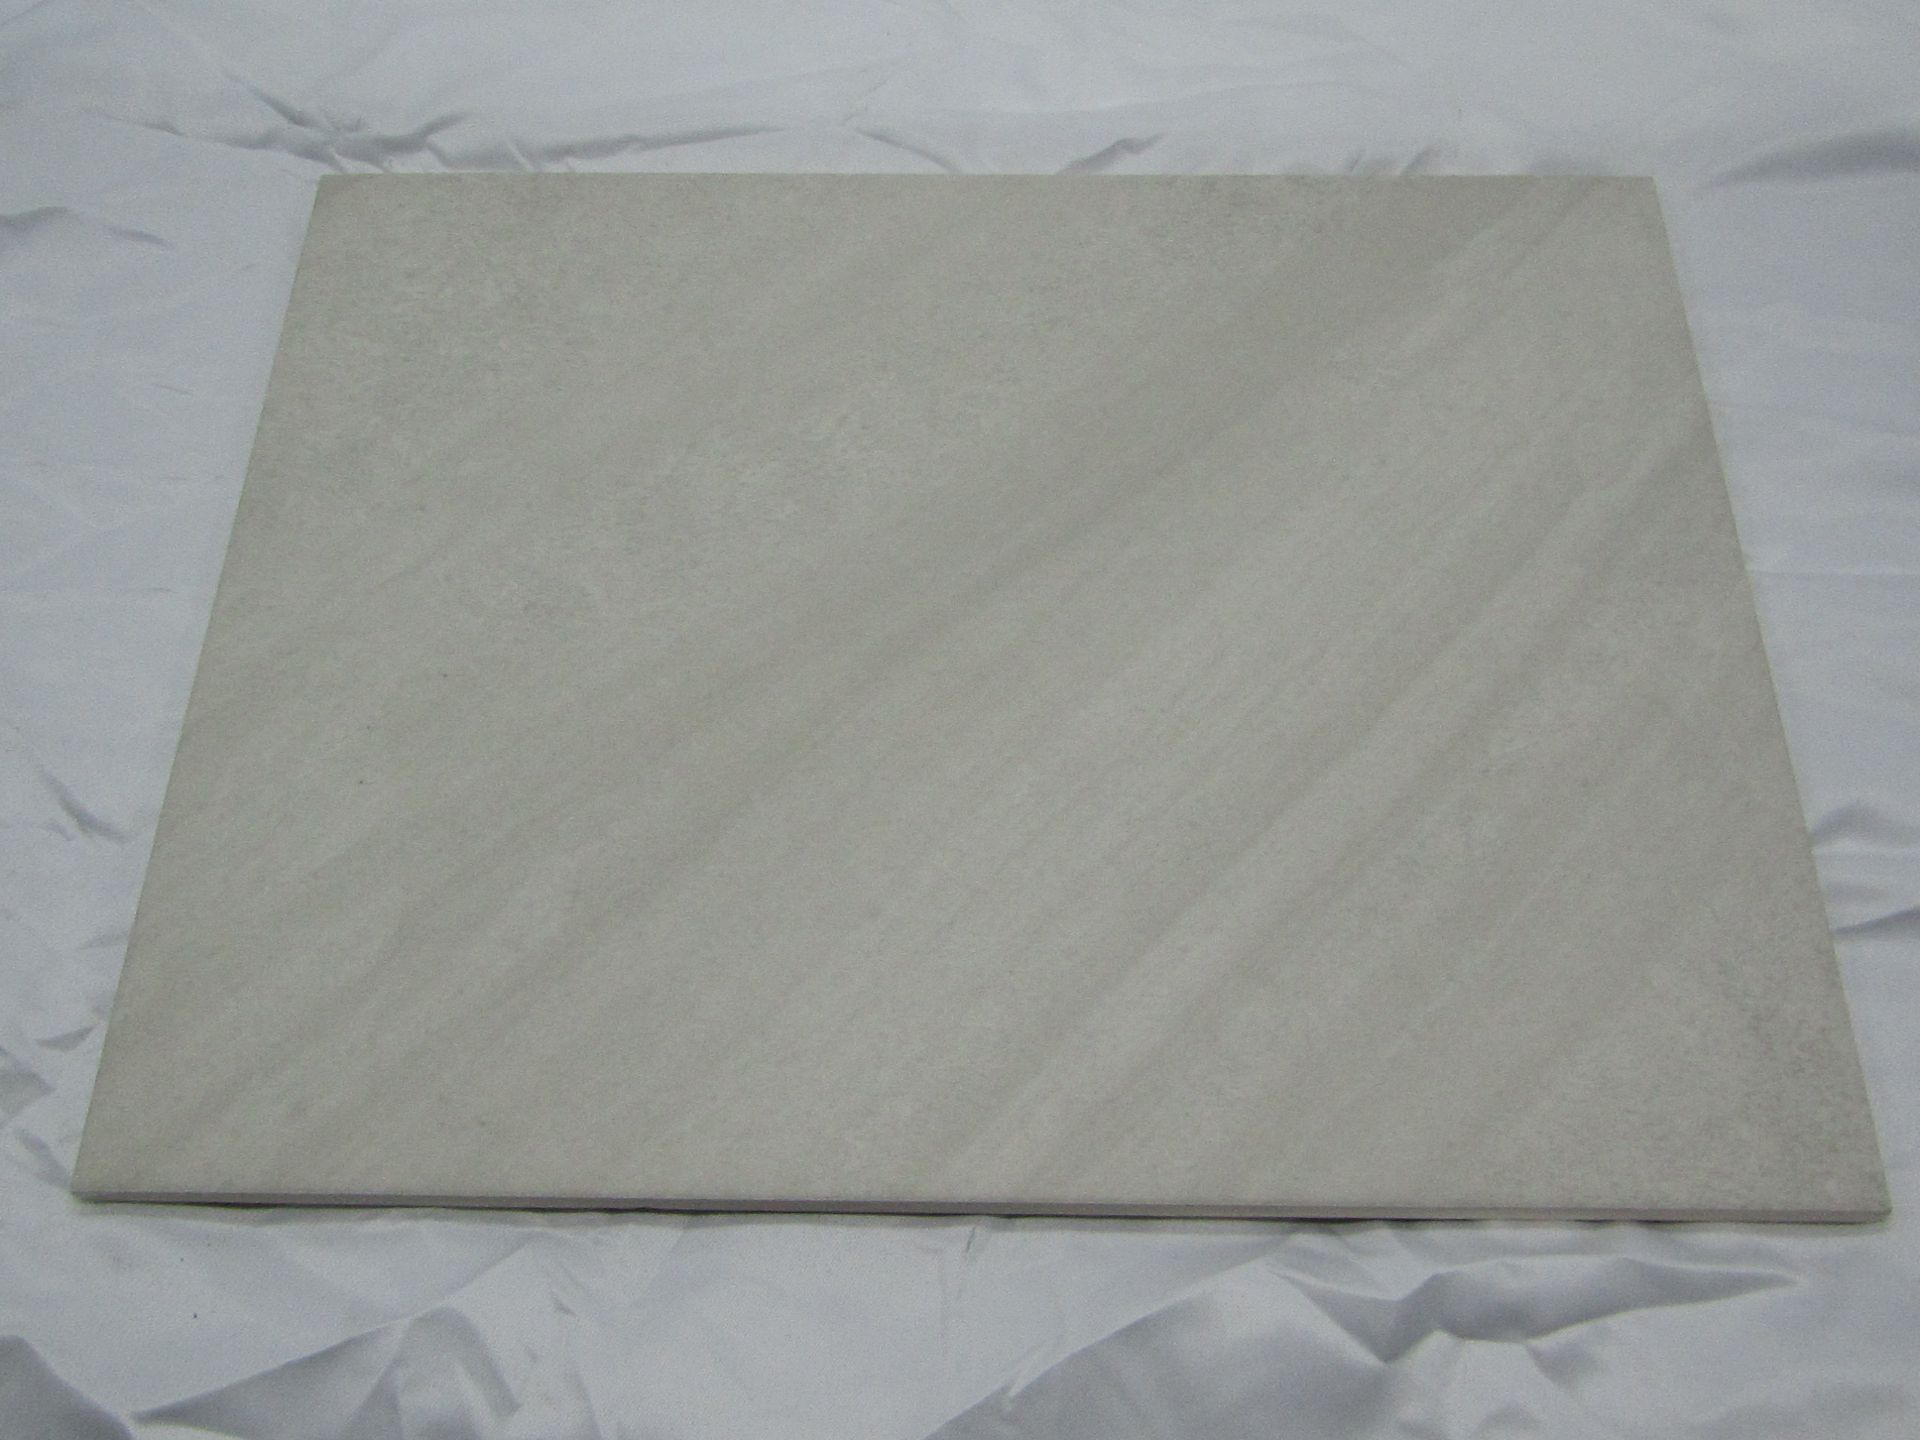 A pallet of 40x packs of 5 Homebase 600x300mm Distressed Damask Grey wall tiles, new, ref code